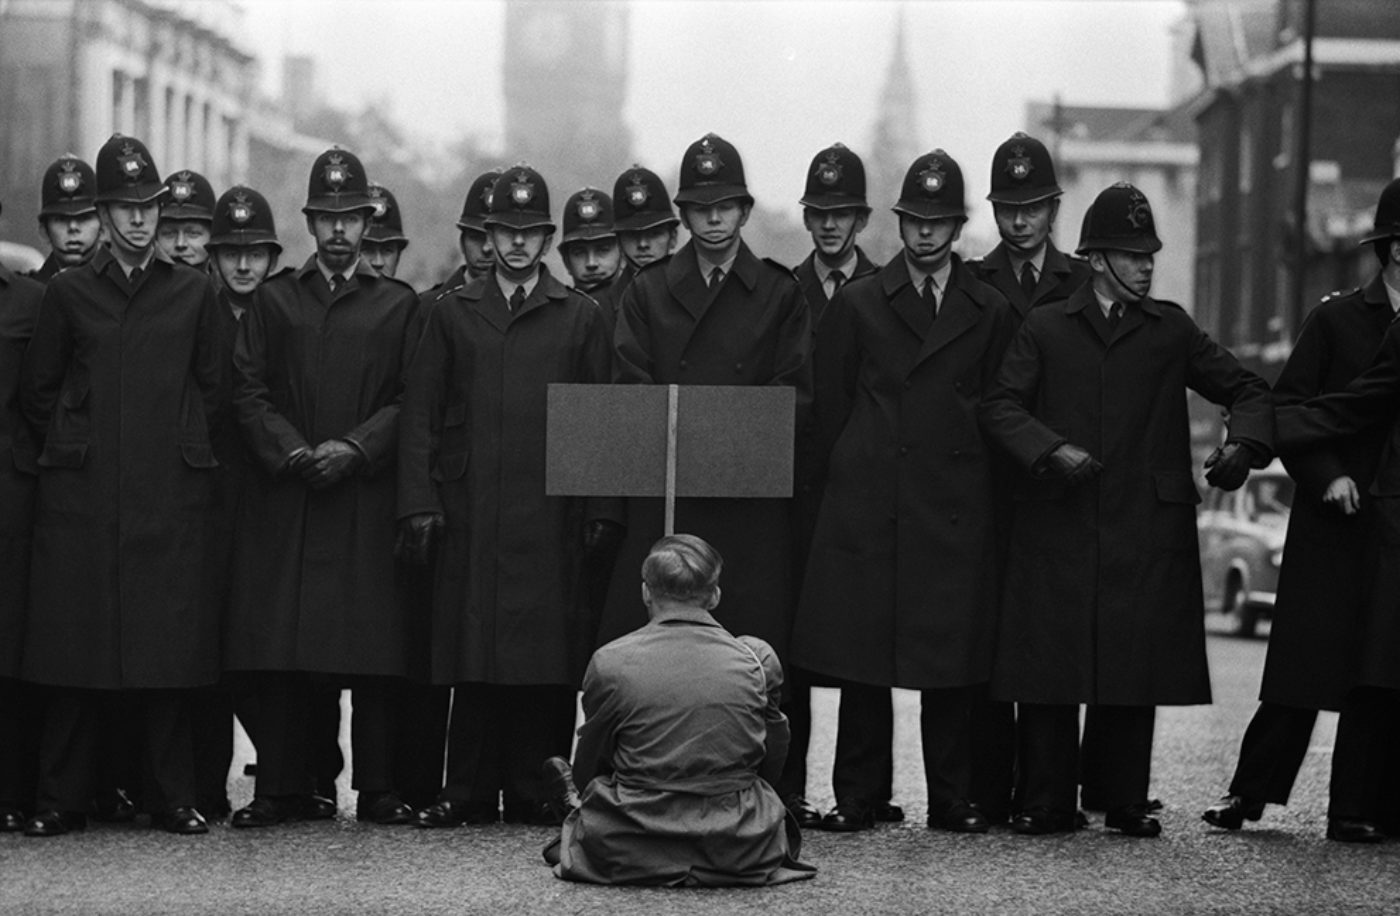 https://harpers.org/wp-content/uploads/2019/09/Protester-Cuban-Missile-Crisis-Whitehall-London-1963-Don-McCullin-1400x0-c-default.jpg